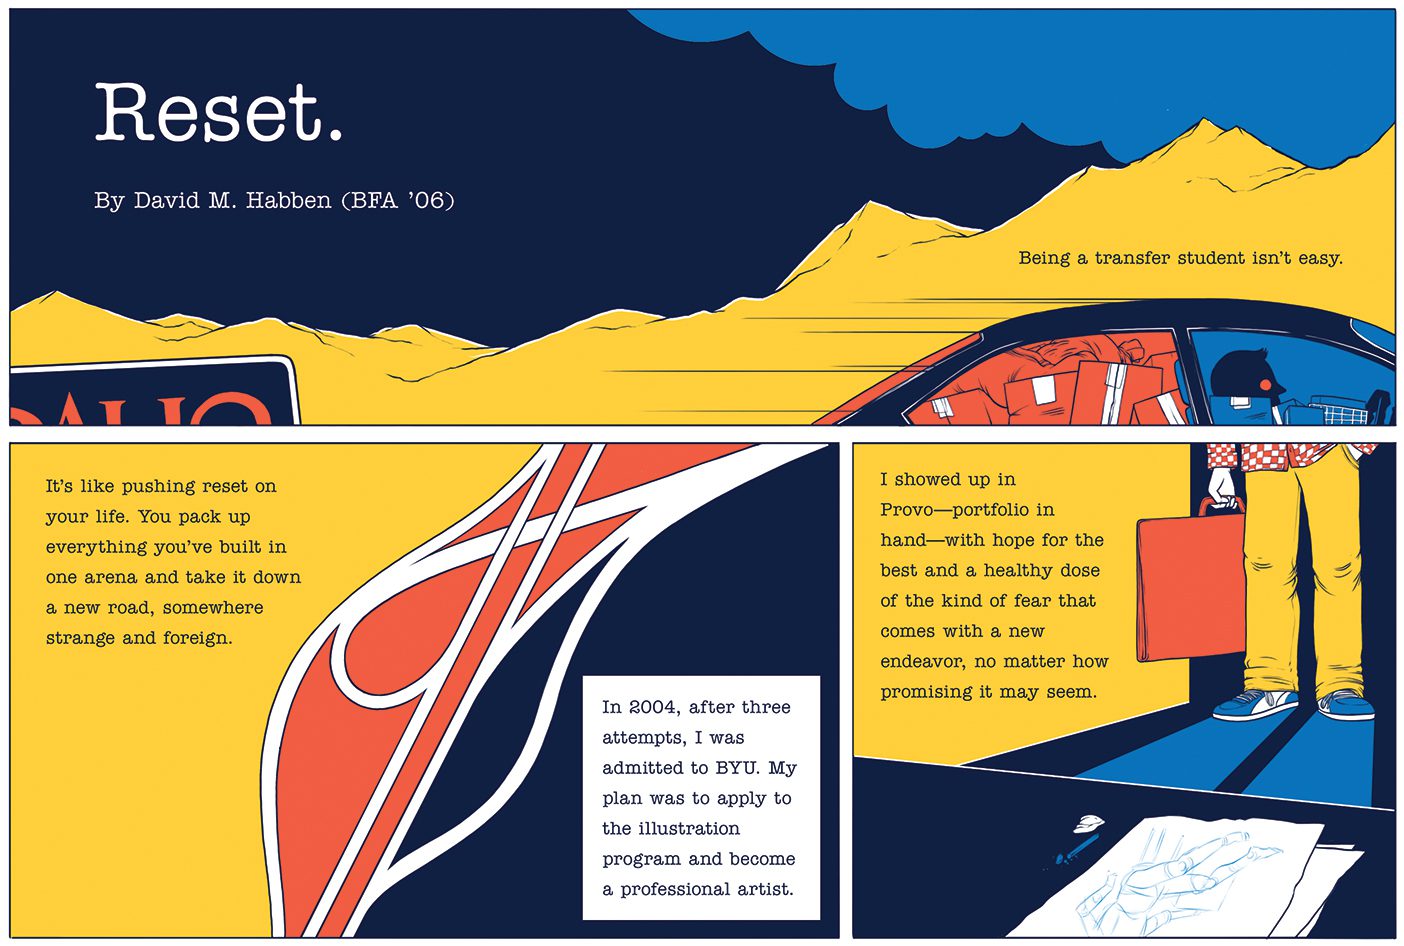 Part 1 of a comic: The first panel has the title, “Reset.” Showing a vague mountain scape. It reads, “Being a transfer student isn’t easy.” The next panel shows abstract lines separating different colors, it reads, “It’s like pushing reset on your life. You pack up everything you’ve built in one arena and take it down a new road, somewhere strange and foreign." The same panel continues, “In 2004, after three attempts, I was admitted to BYU. My plan was to apply to the illustration program and become a professional artist." Panel 3 then shows the legs and feet of the character with a sketch carrying case in hand, looking at a desk with a sketch upon it. Text reads, "I showed up in Provo--portfolio in hand--with hope for the best and a healthy dose of the kind of fear that comes with a new endeavor, no matter how promising it may seem.